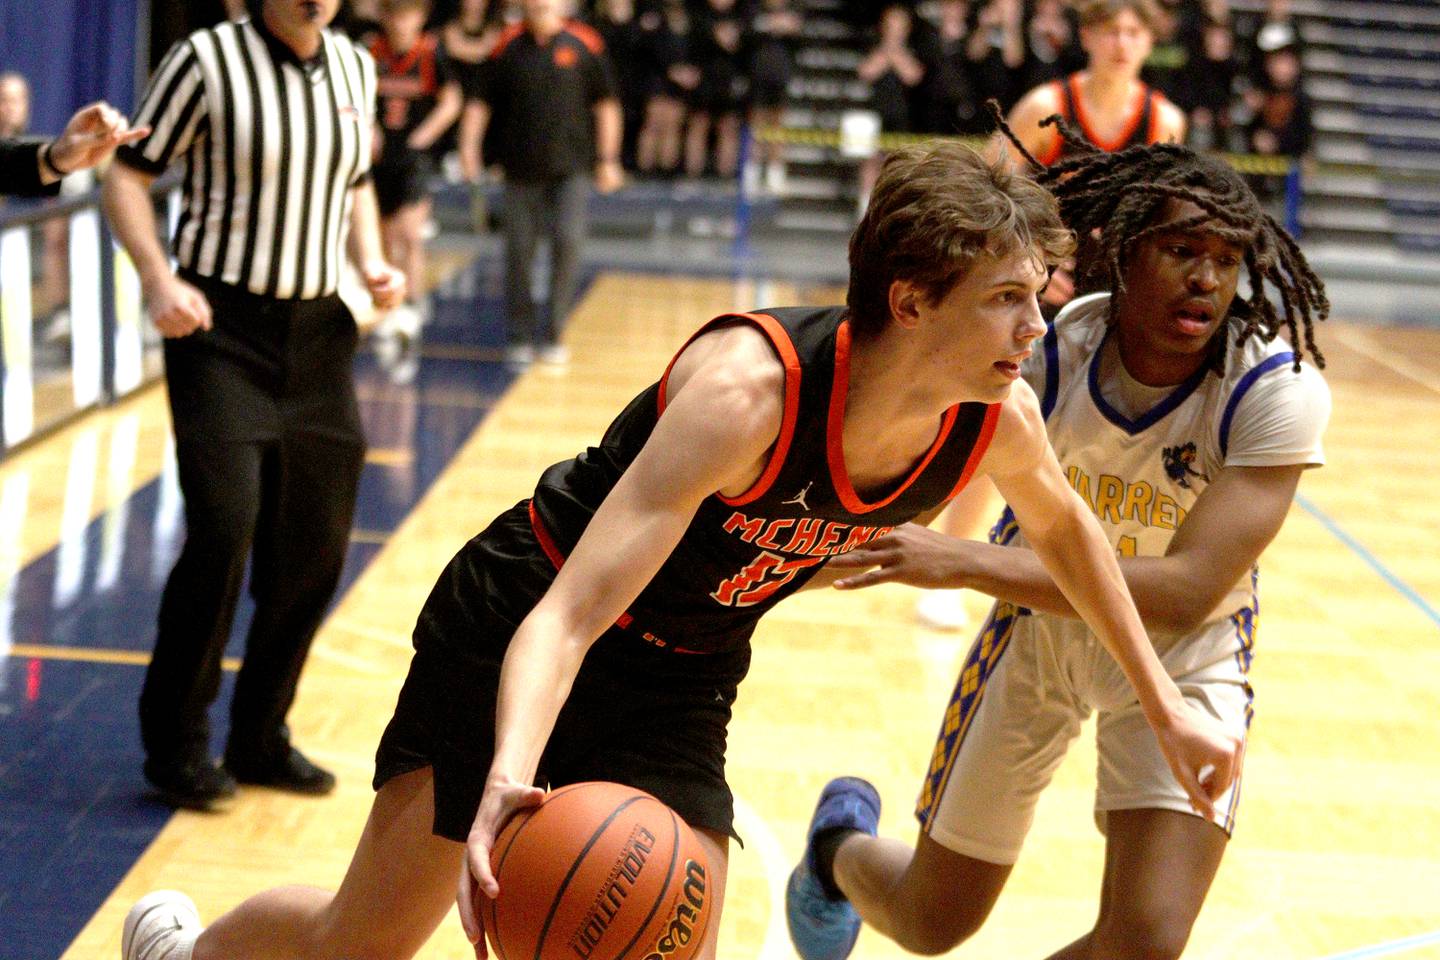 McHenry’s Caleb Jett, front, moves the ball as Warren’s Braylon Walker defends during IHSA Class 4A Sectional Final action at Rock Valley College on Friday night.